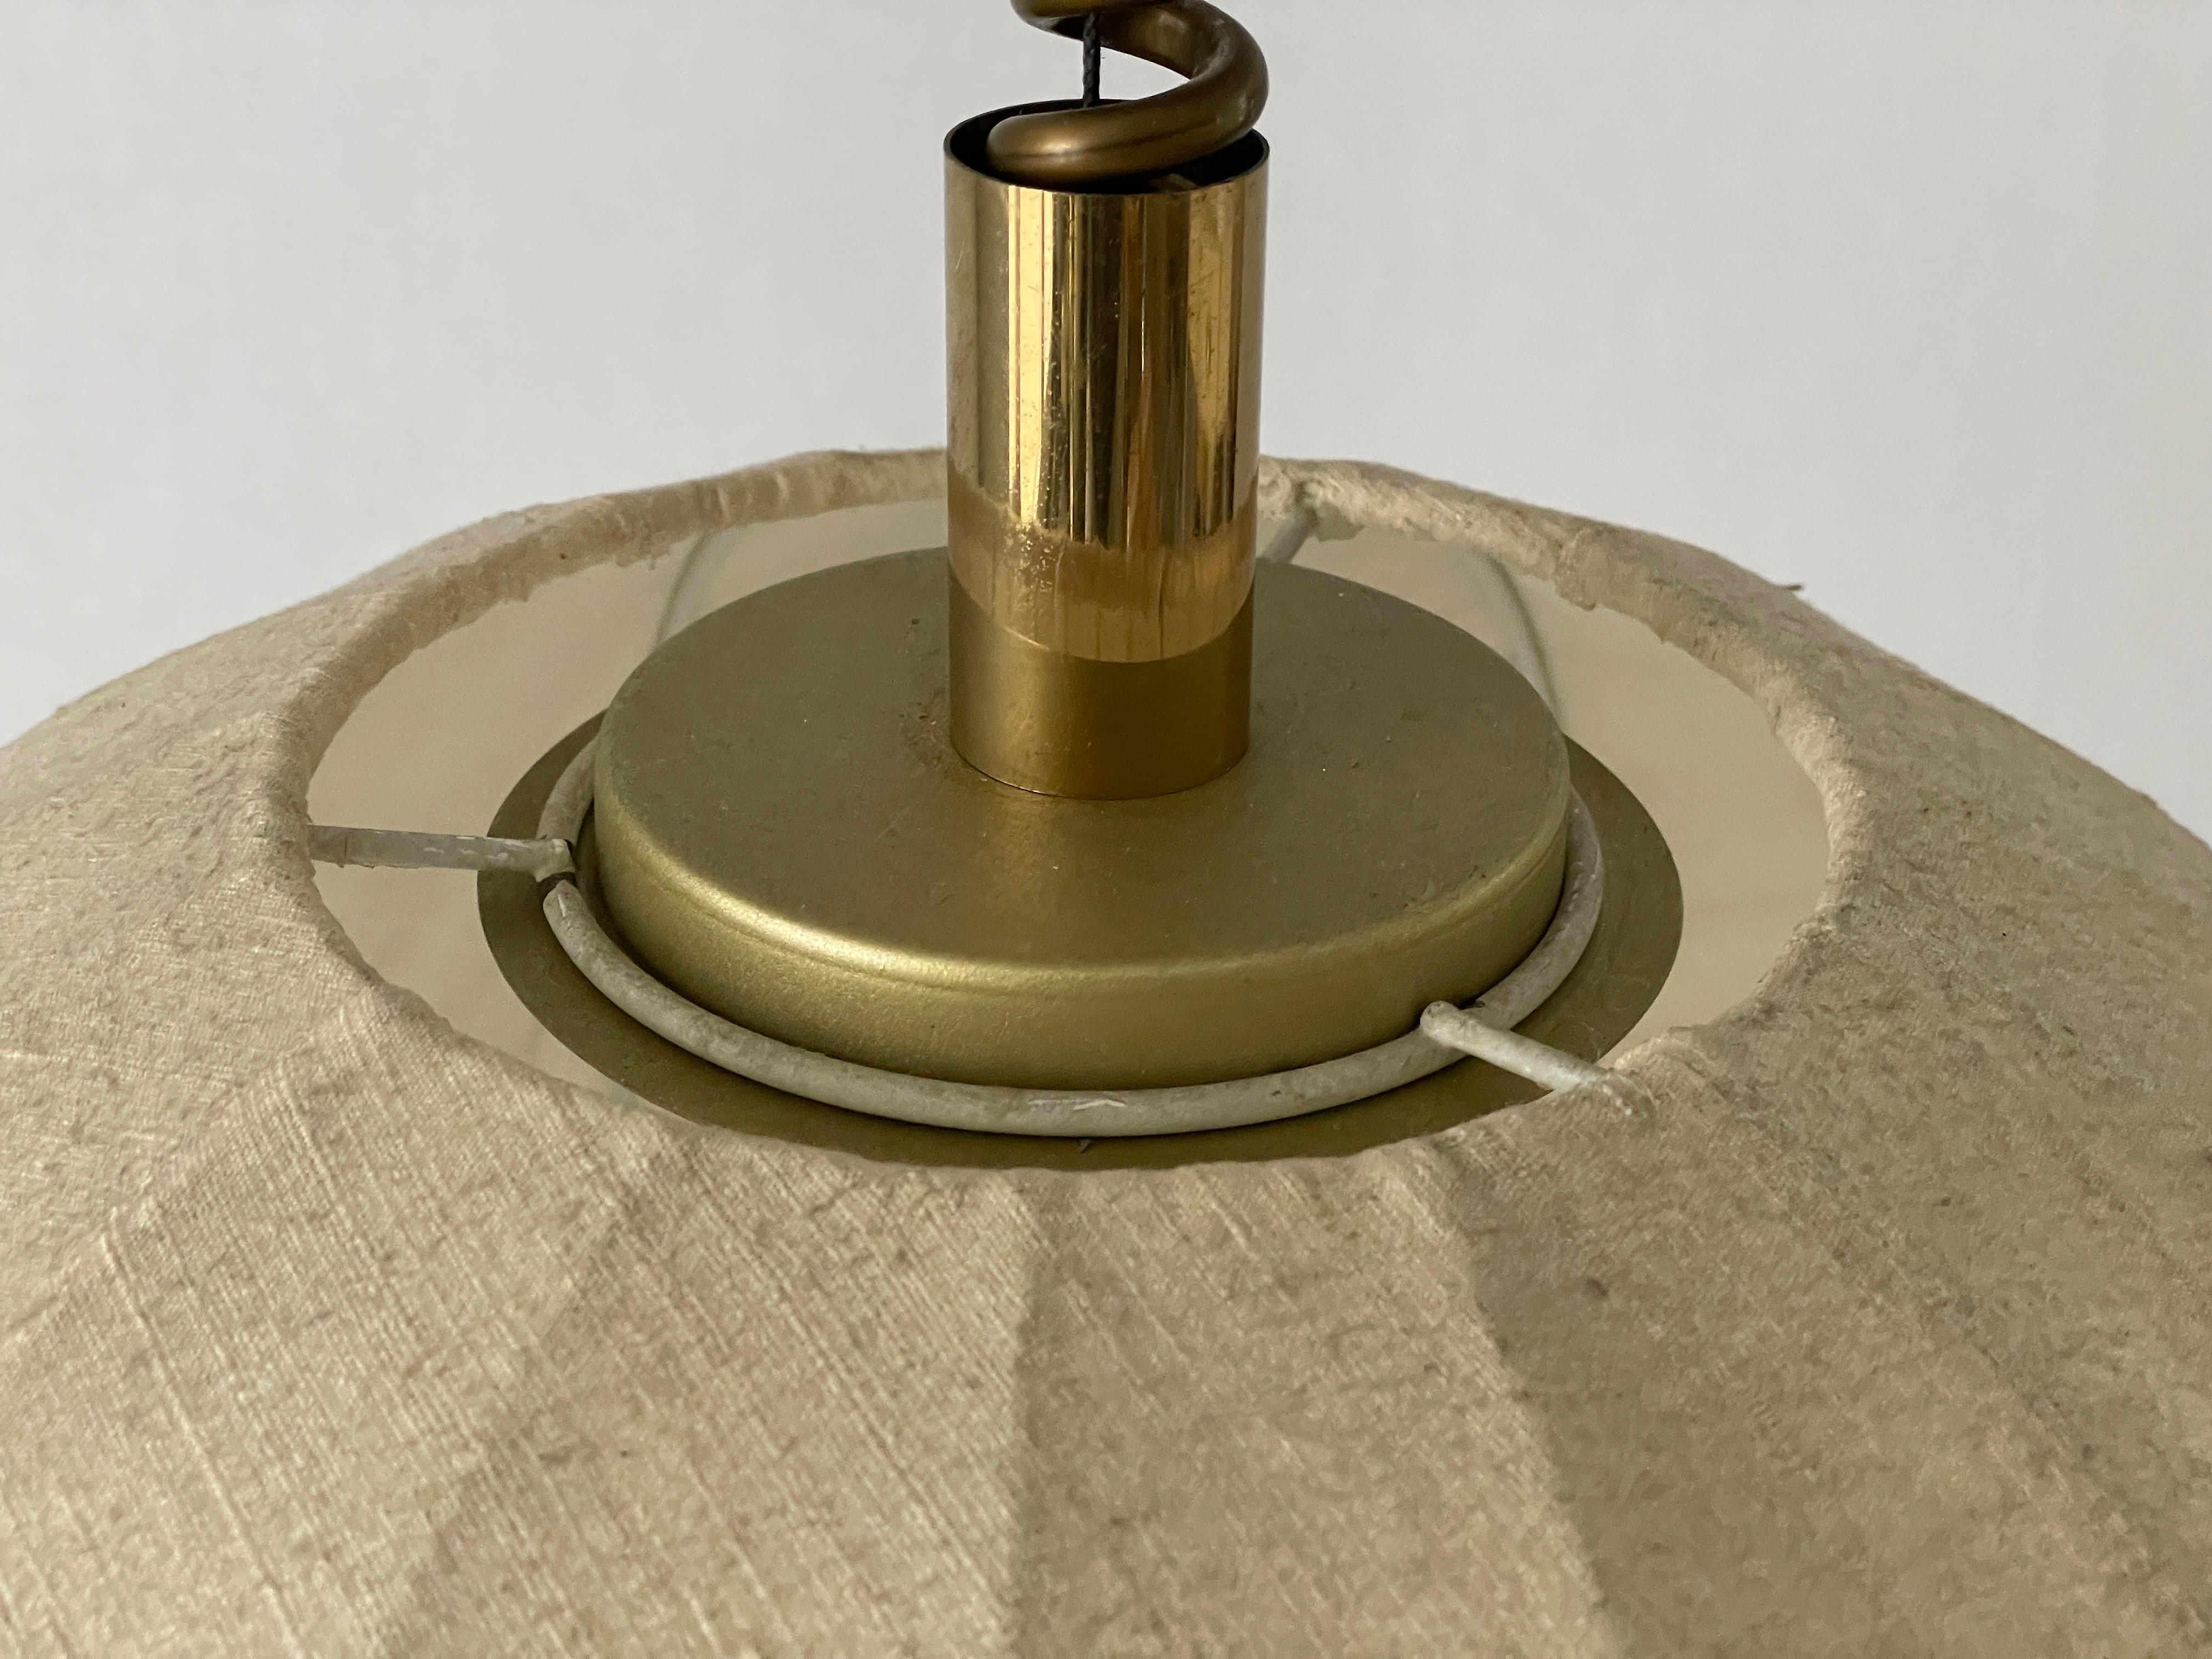 Fabric and Brass 3 socket Adjustable Shade Pendant Lamp by WKR, 1970s, Germany For Sale 3